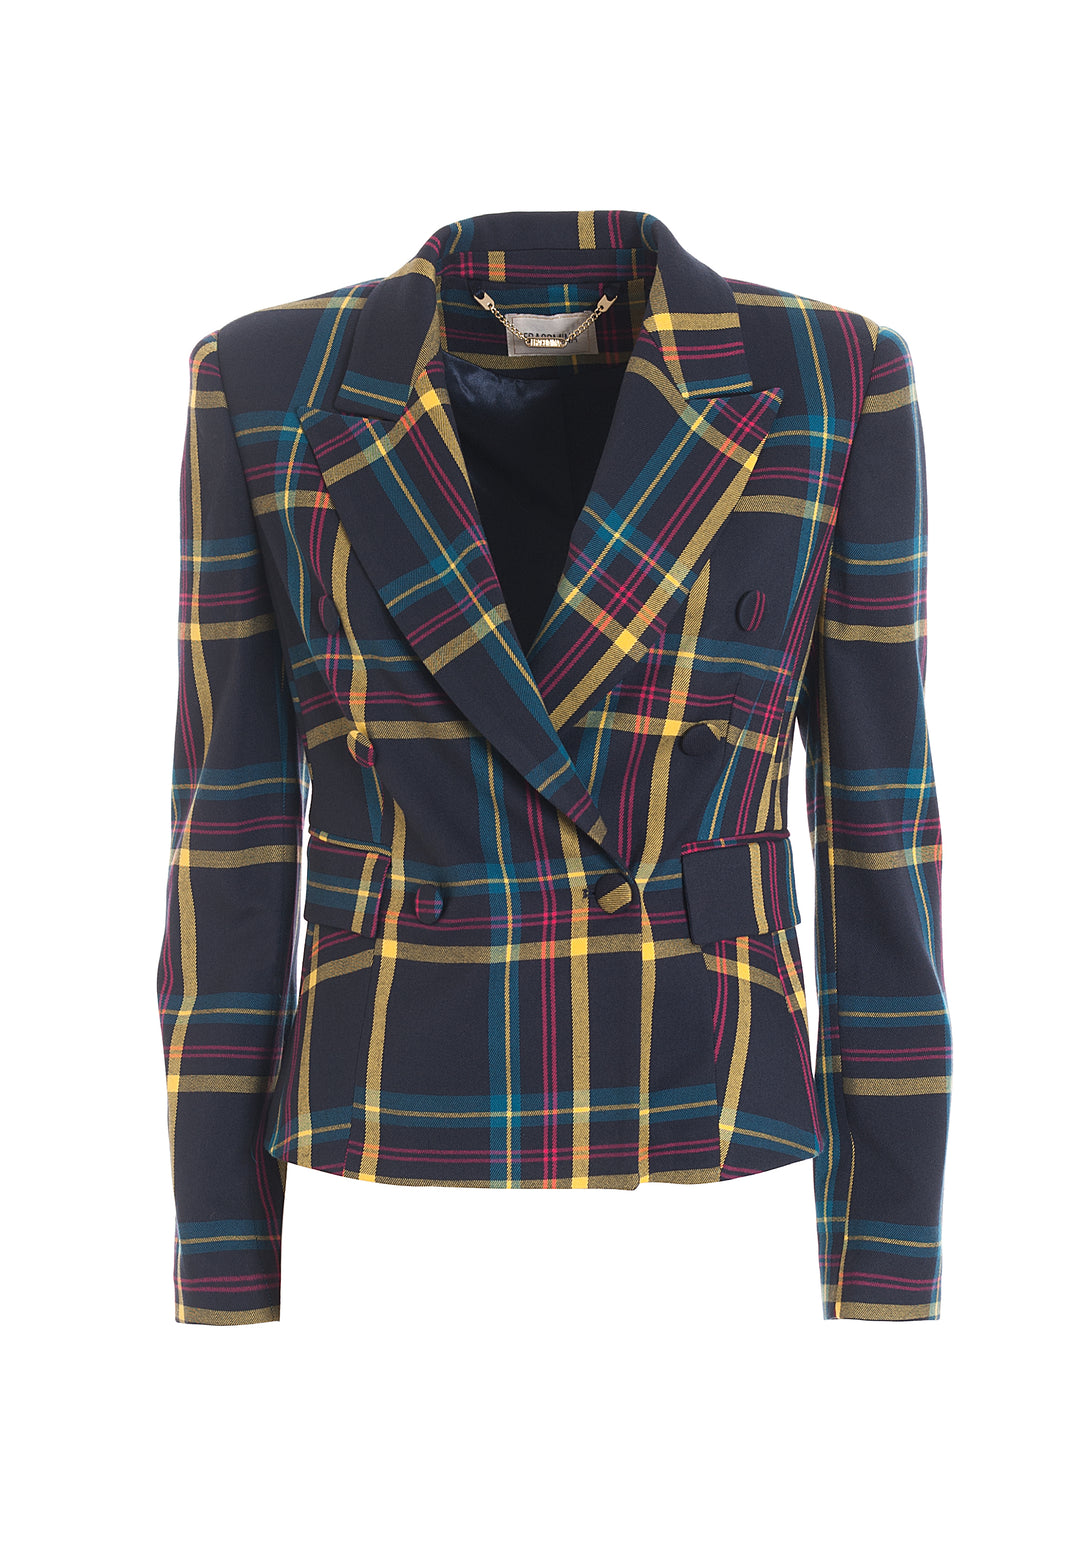 Blazer regular fit double breasted made in tartan